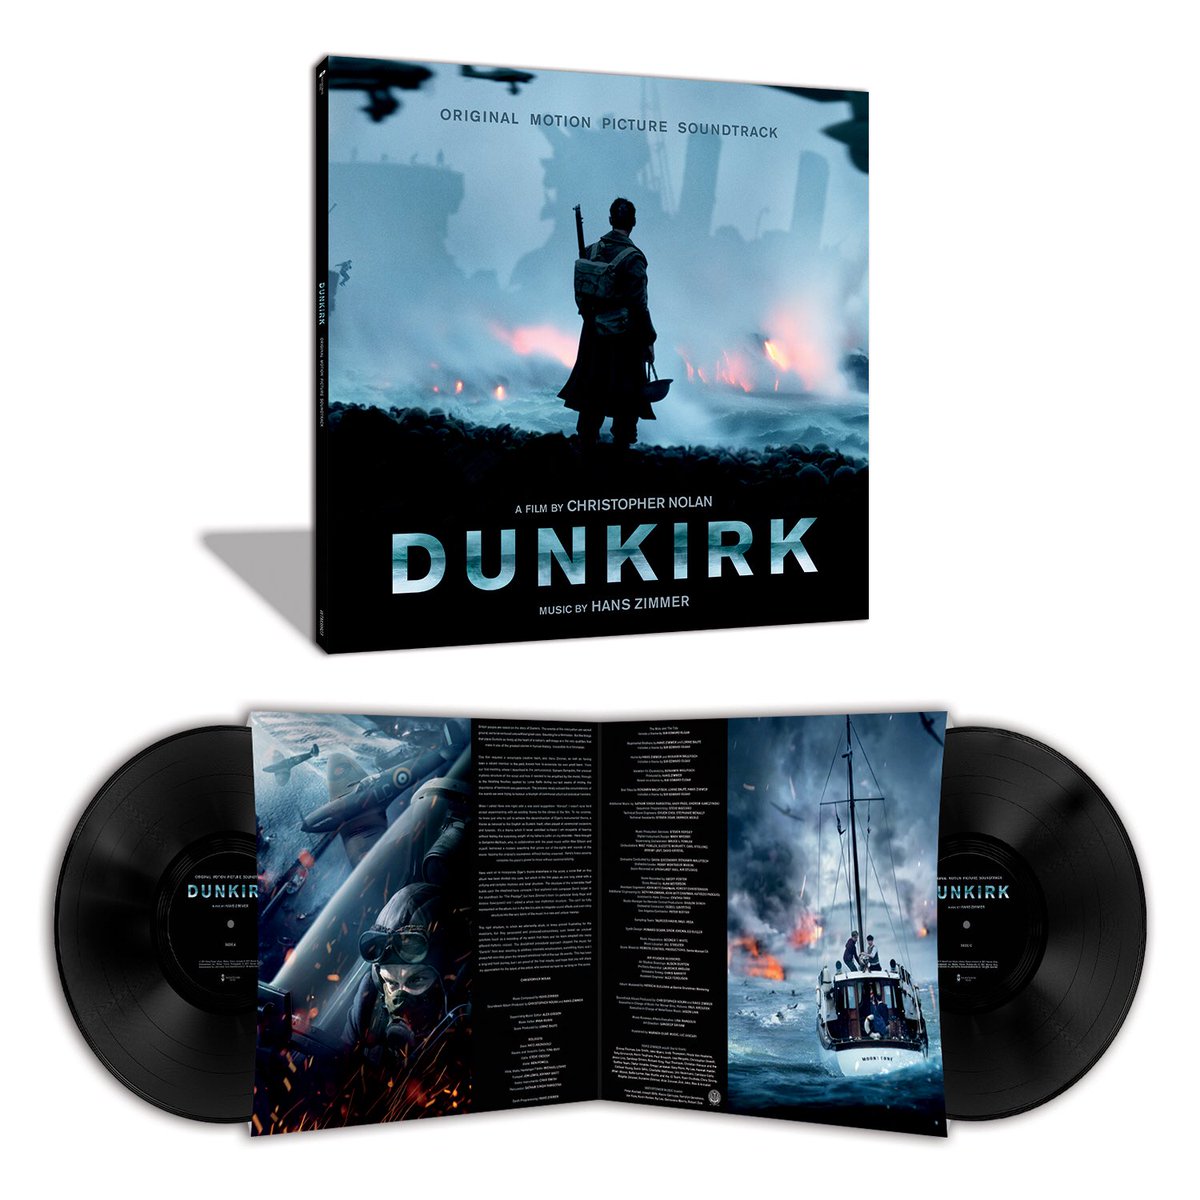 Dunkirk on Twitter: "The #Dunkirk soundtrack by @HansZimmer is available now on #Vinyl. Click here check it out: https://t.co/lIjxjyFifK https://t.co/W3IZd6Gjgt" / Twitter